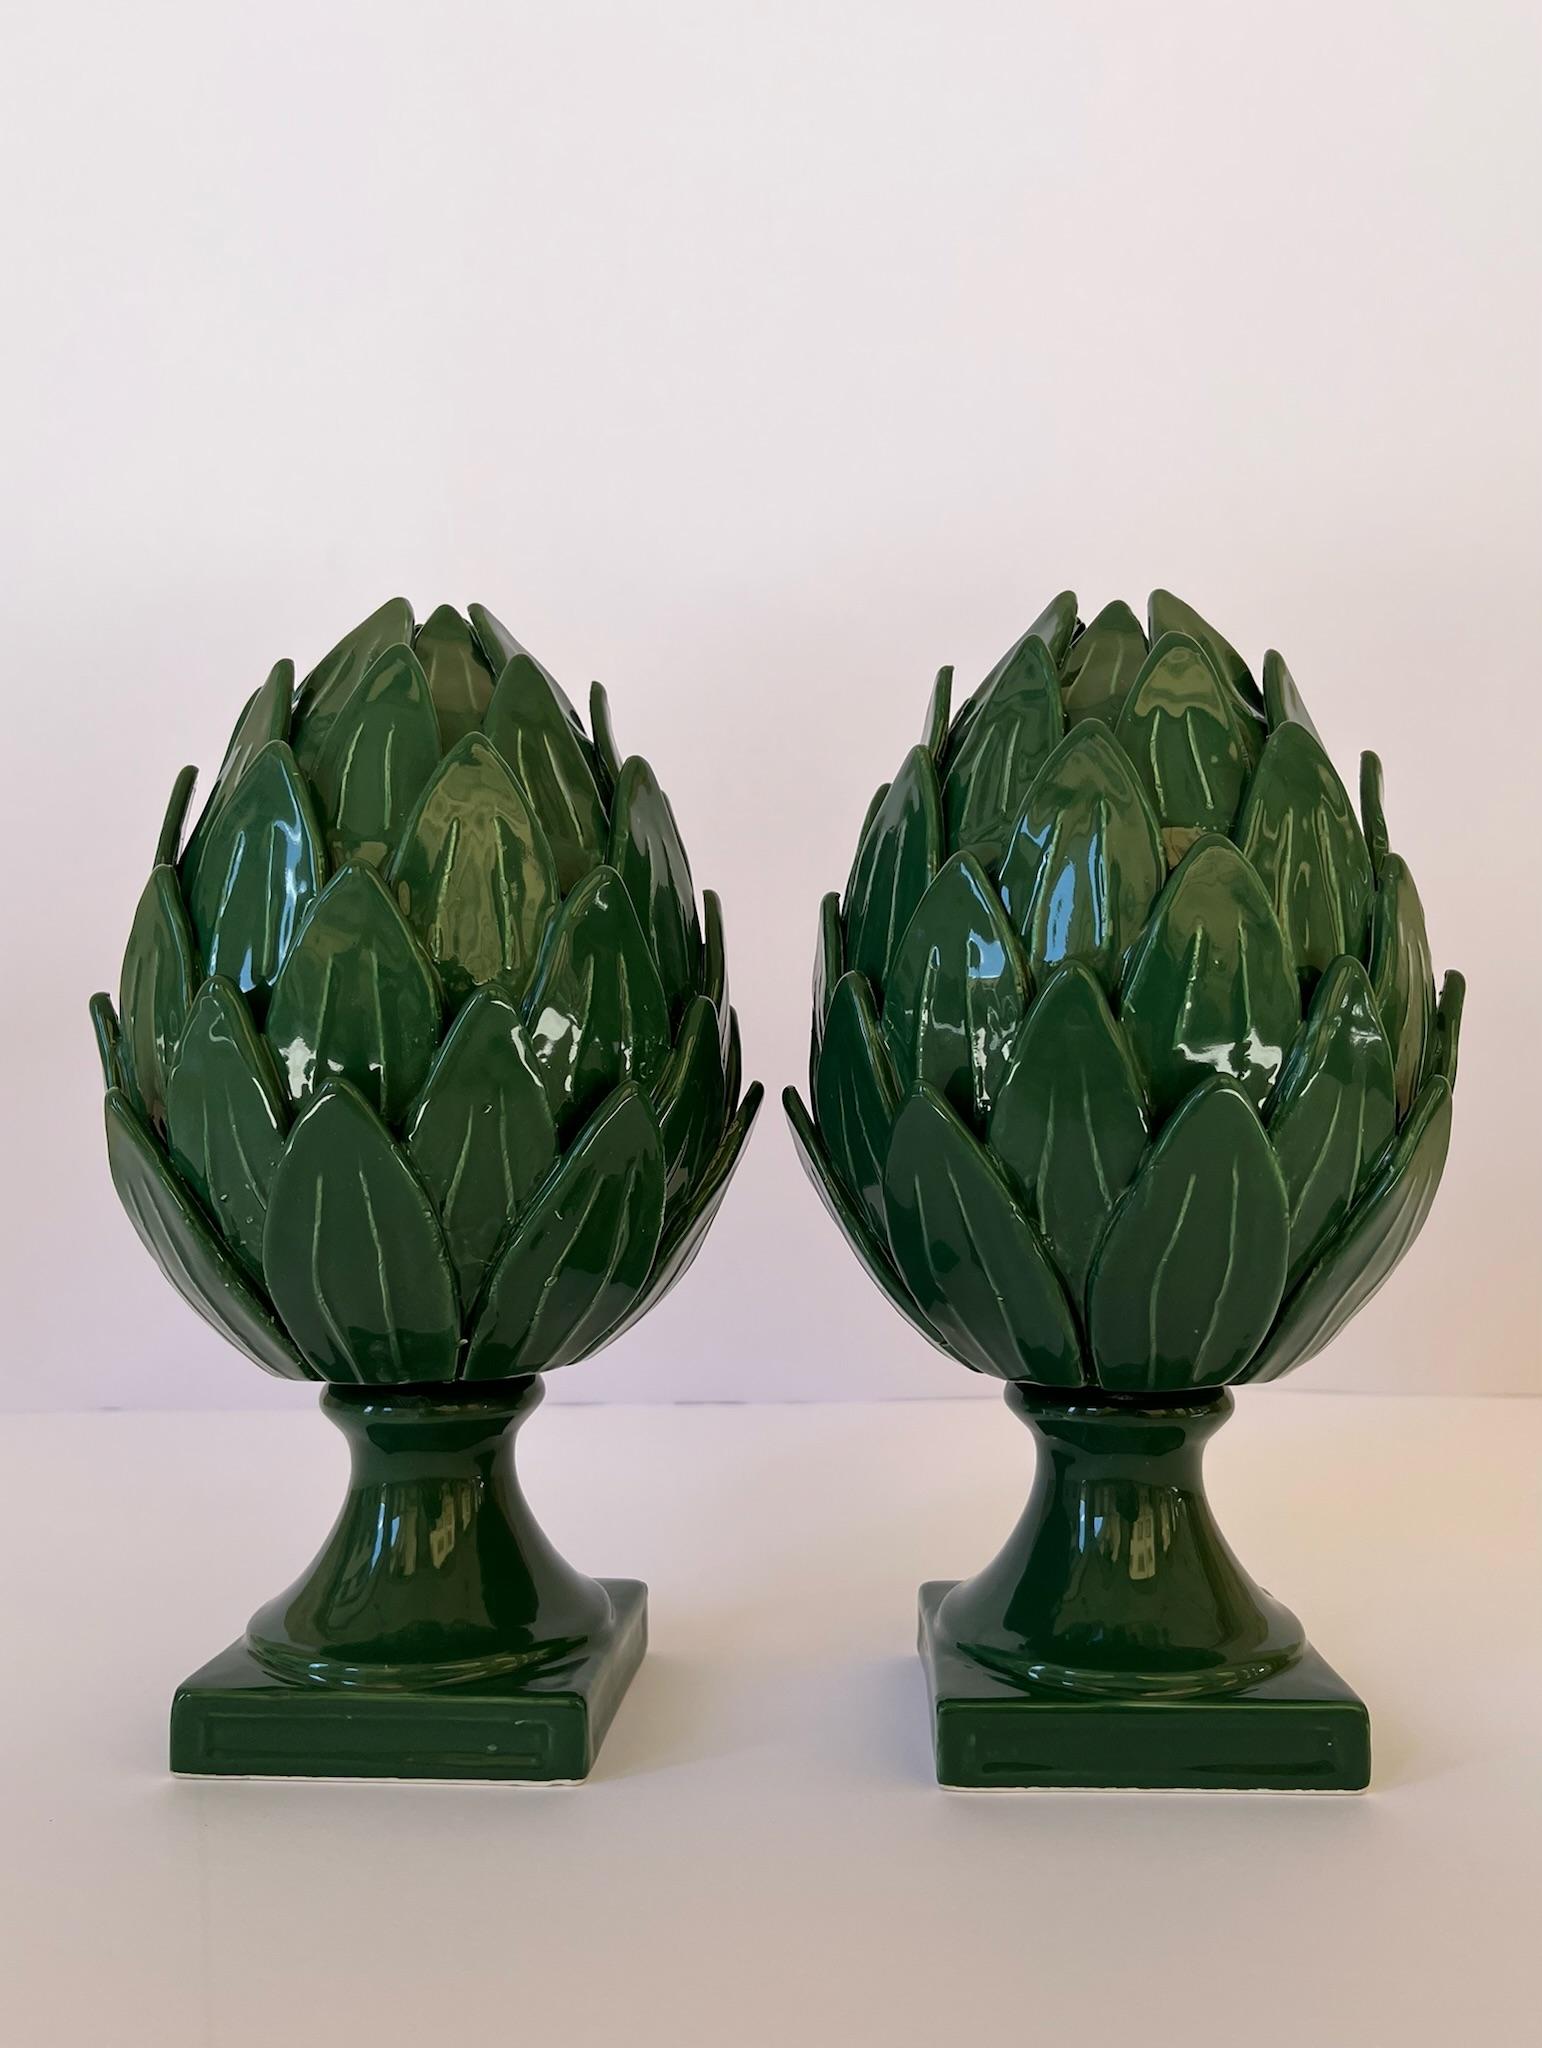 Very rare pair of artichokes in Vecchia Este ceramic, in green color.
These pieces were made in the 21st century in ceramics in a small town near the area of Padua.

These artichokes require a huge amount of work as each piece is applied manually